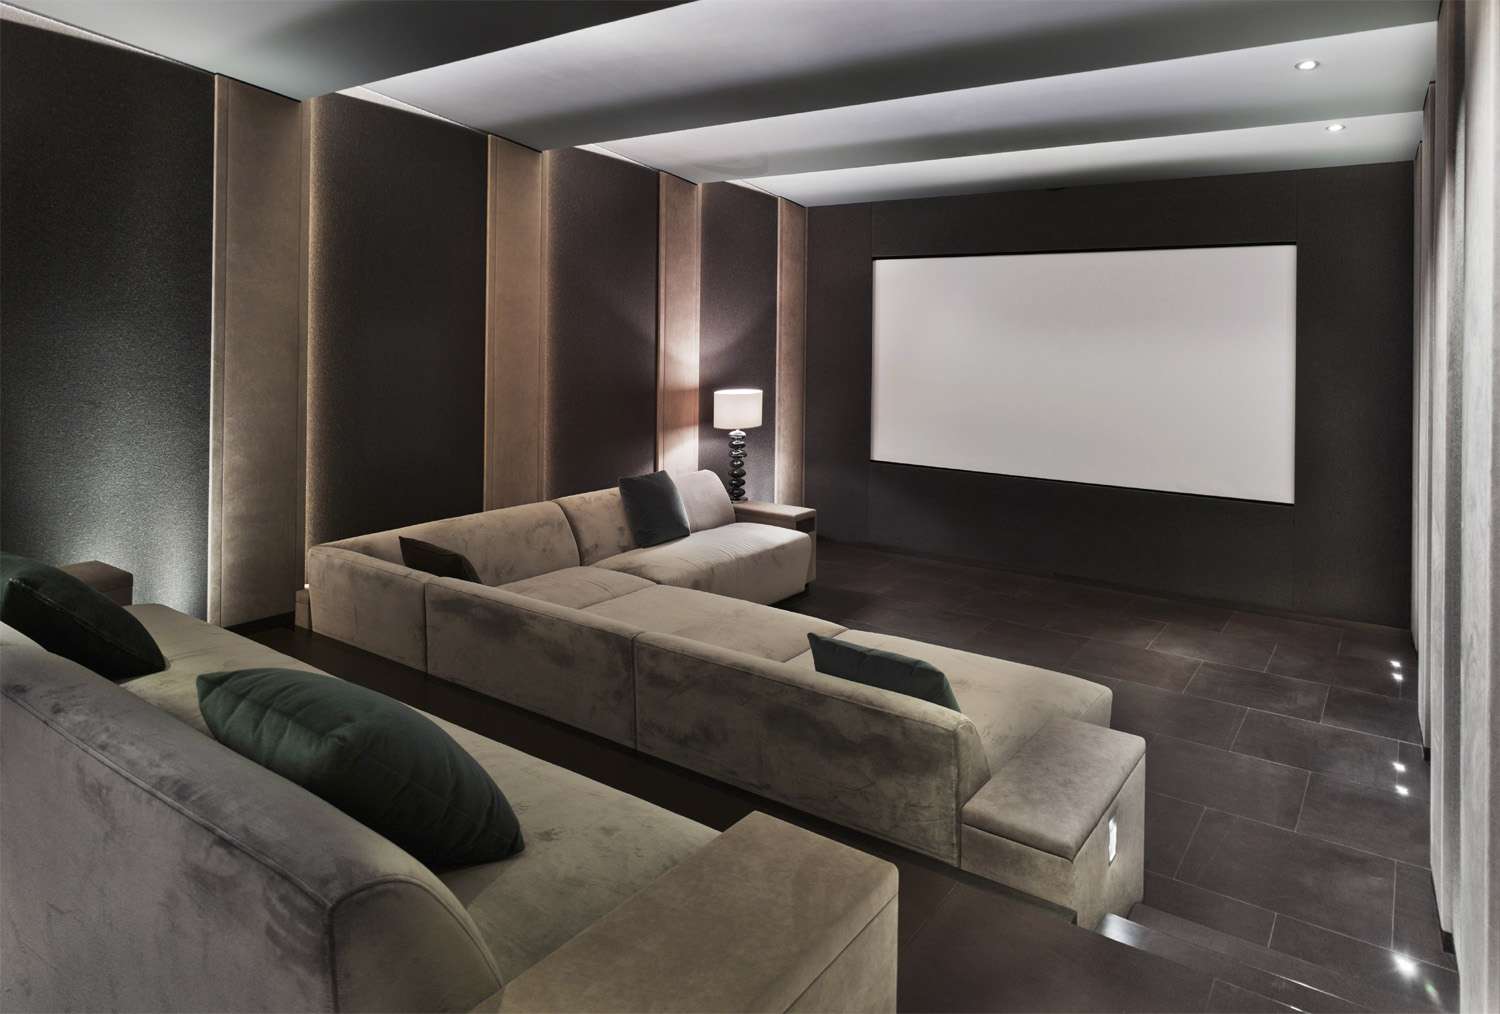 Tips for Building the Perfect Home Movie Theater Room